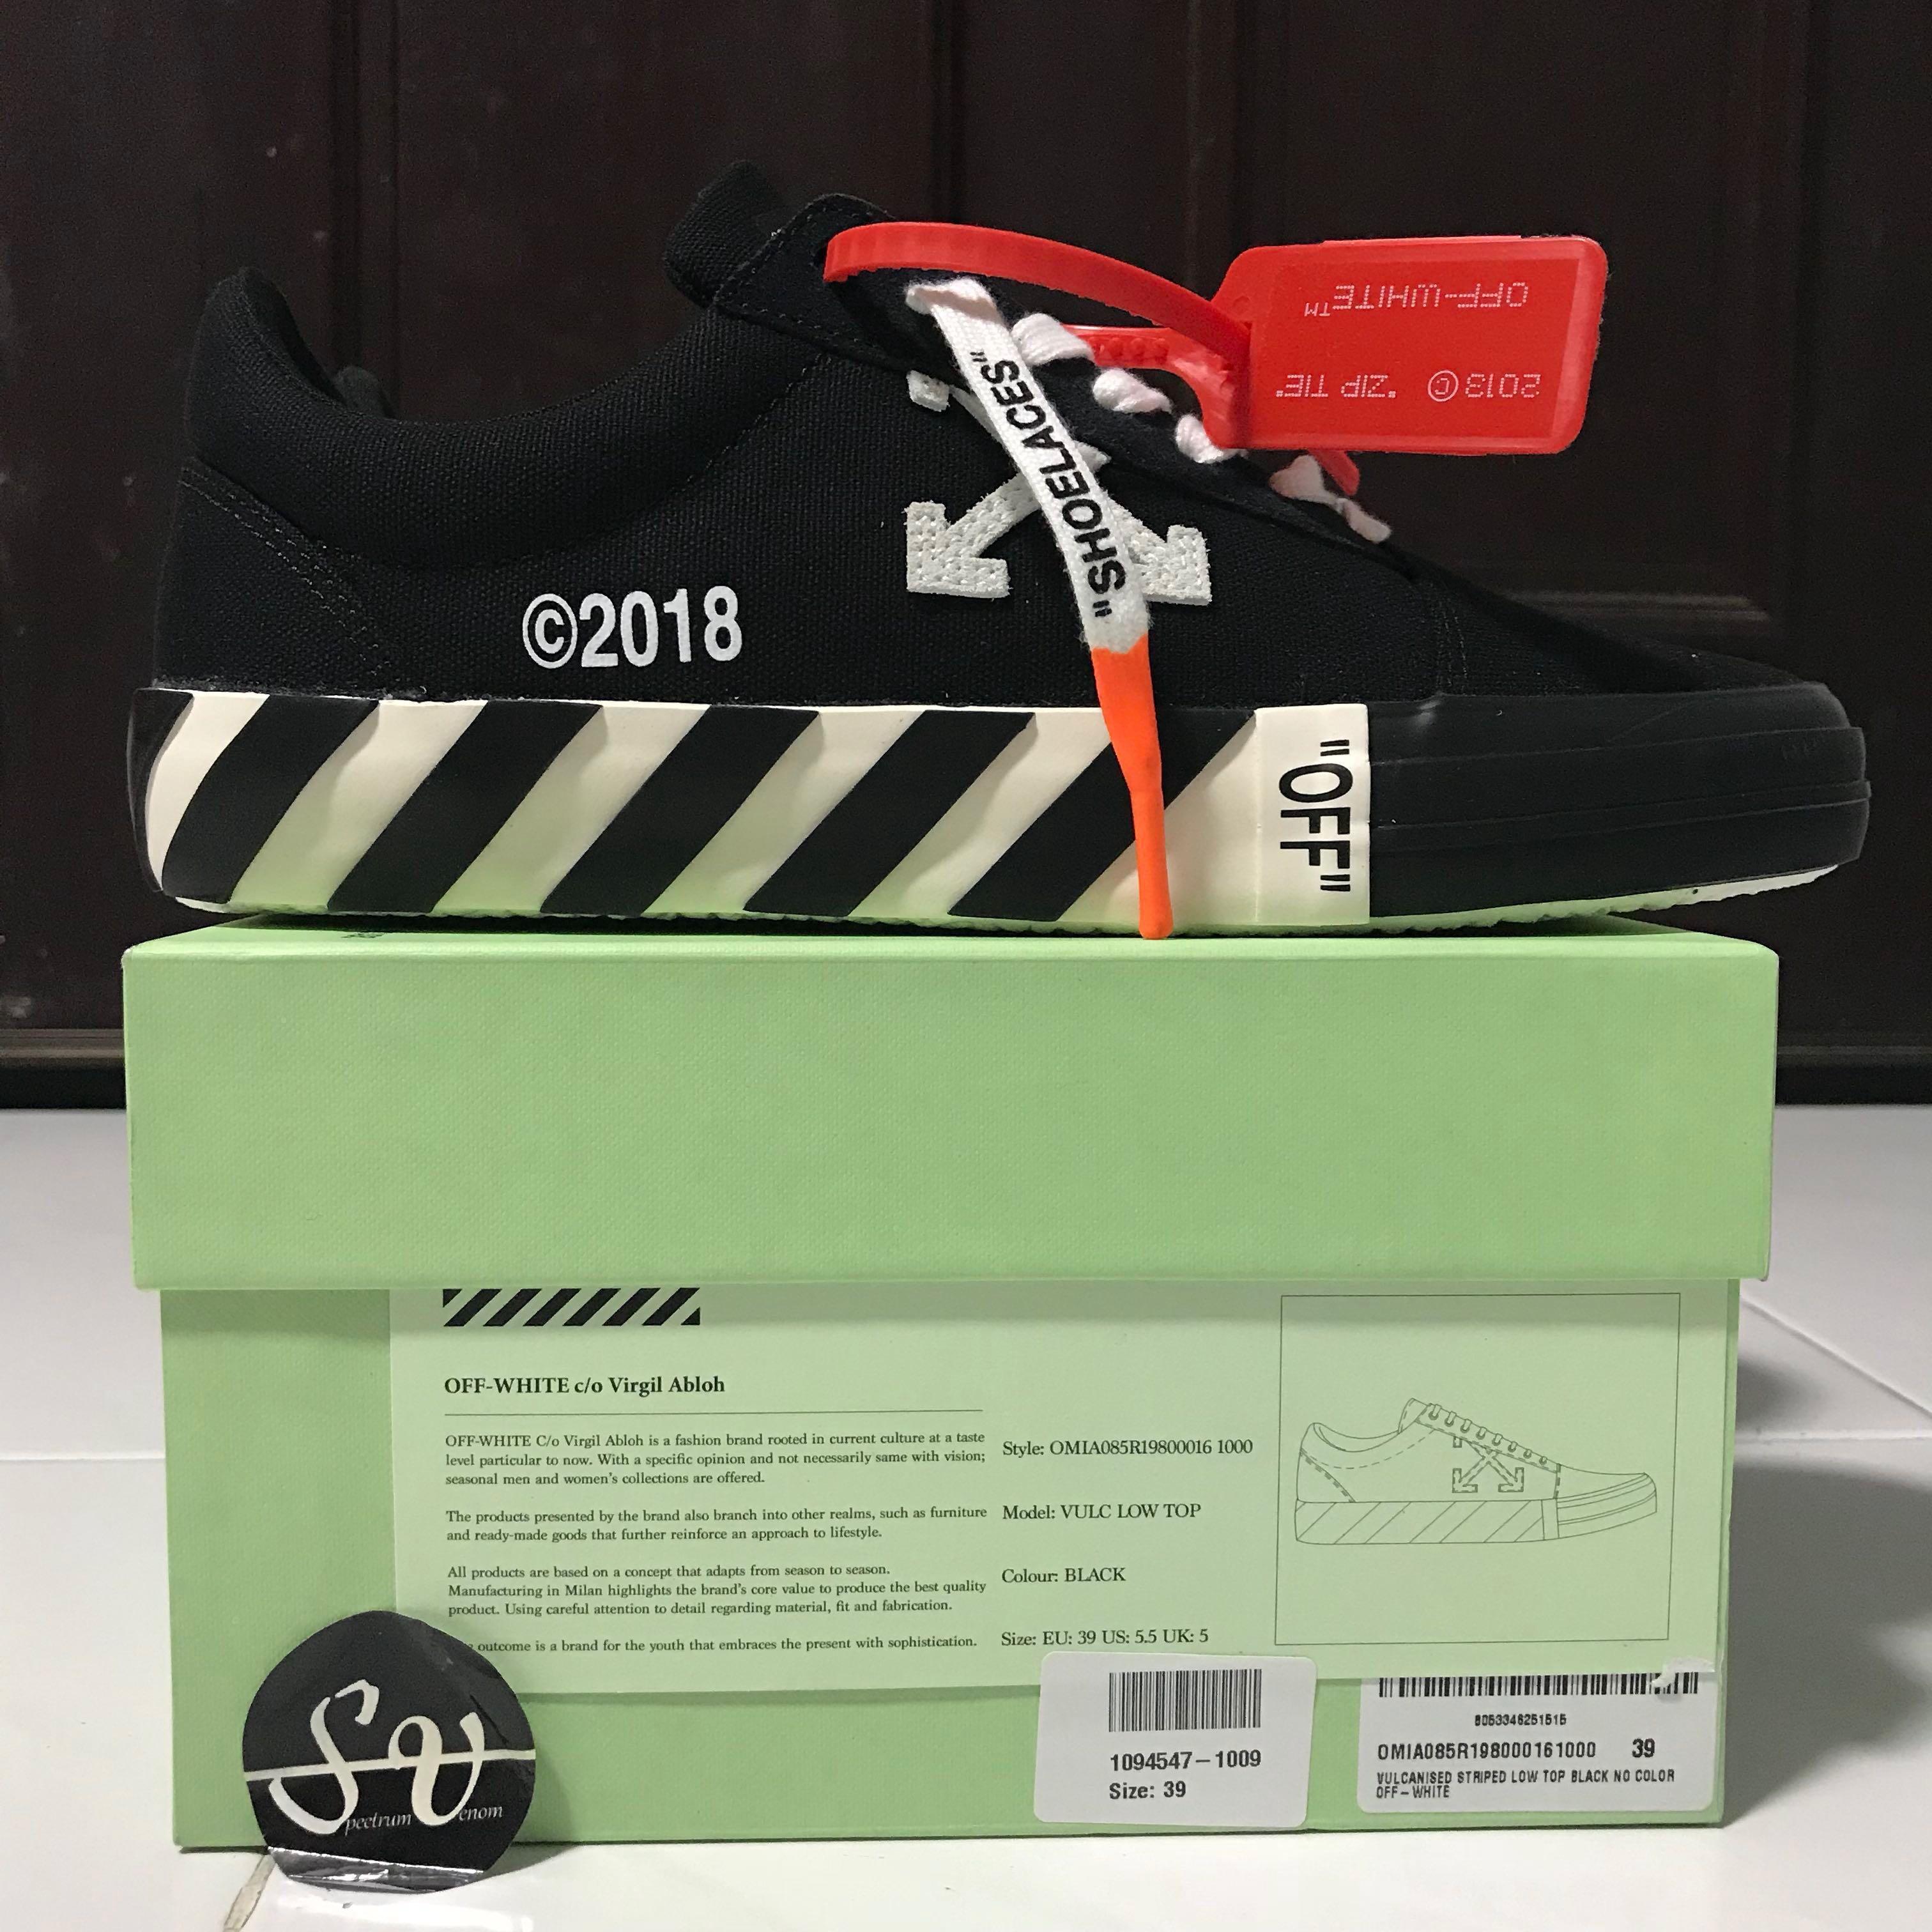 off white vulc low top review